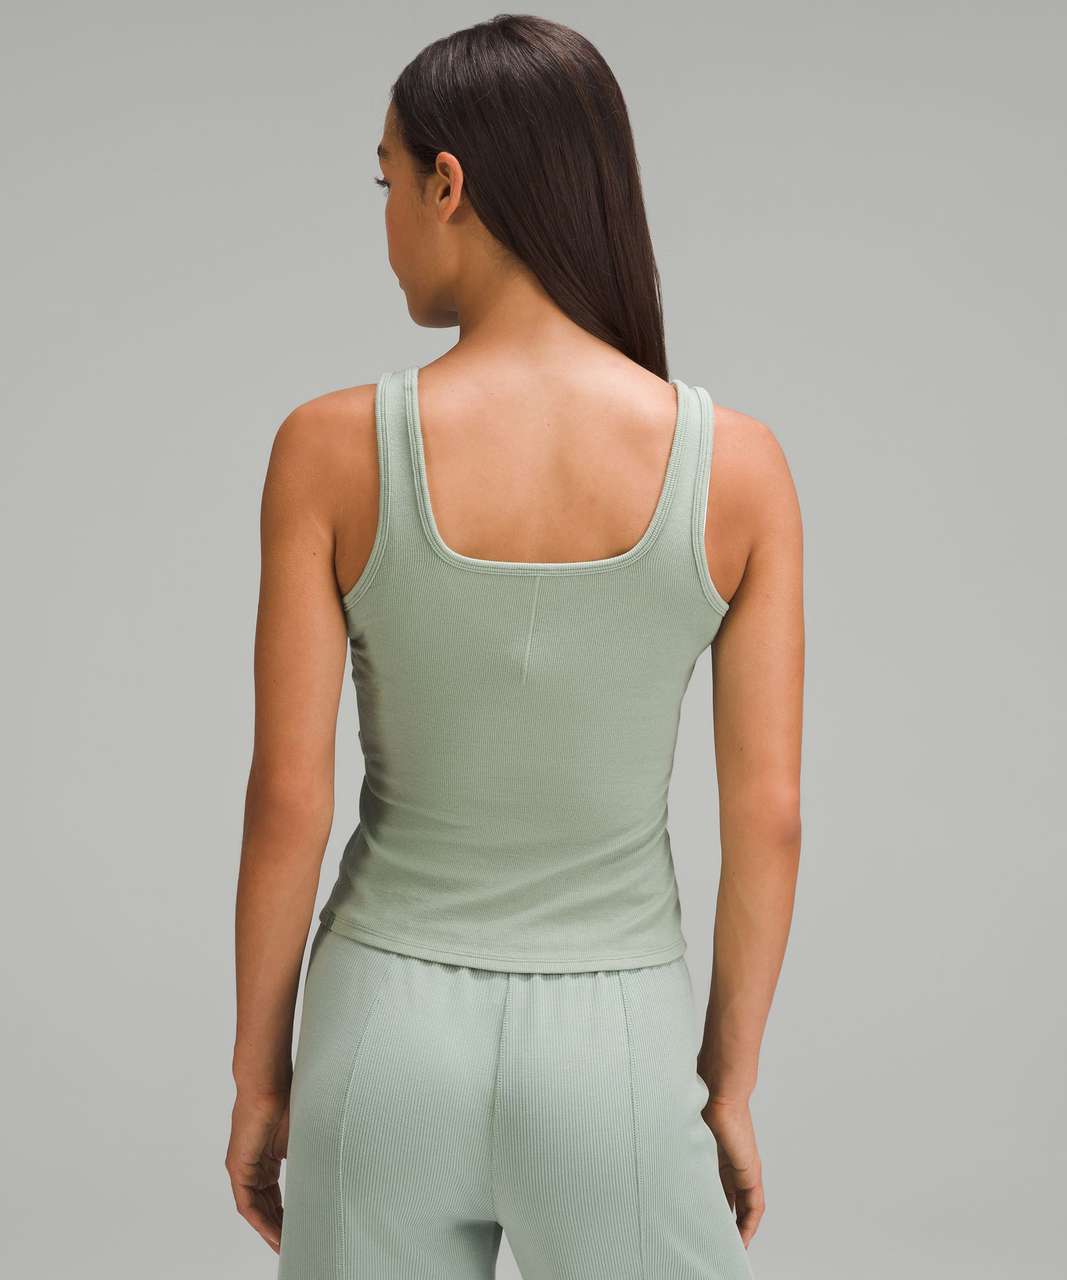 Lululemon Hold Tight Square-Neck Tank Top - Palm Court